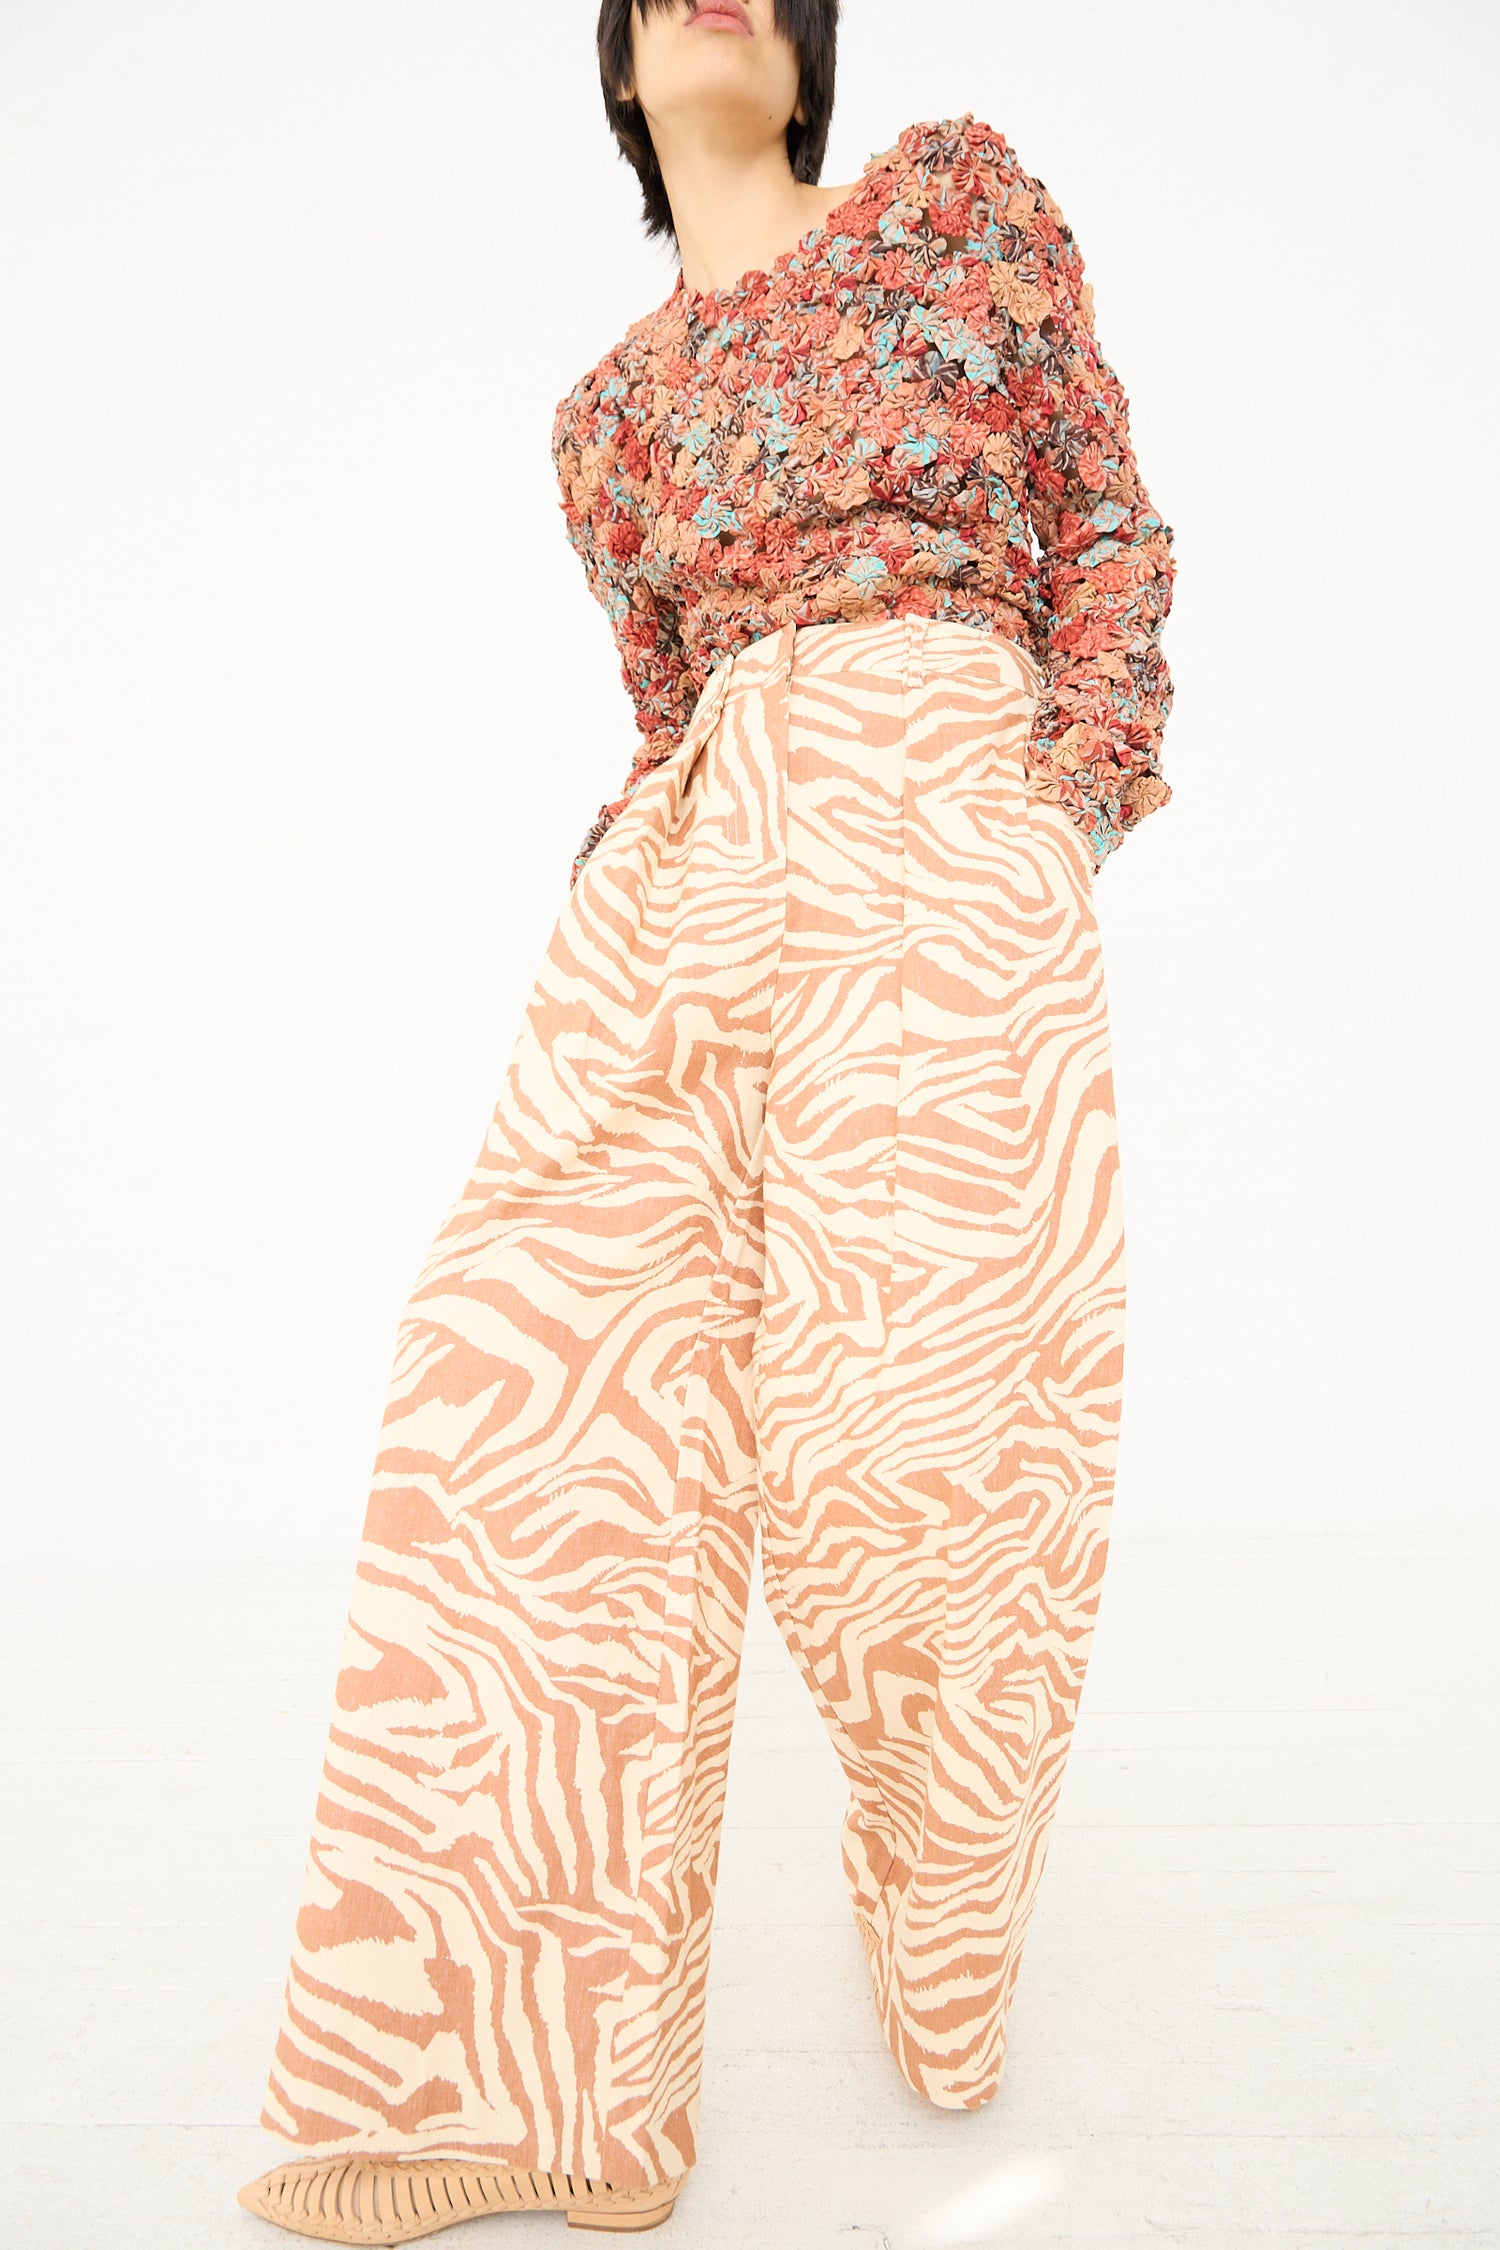 Sentence with replaced product: A person posing in Ulla Johnson's Cai Pant in Gazelle and a floral blouse against a white background.